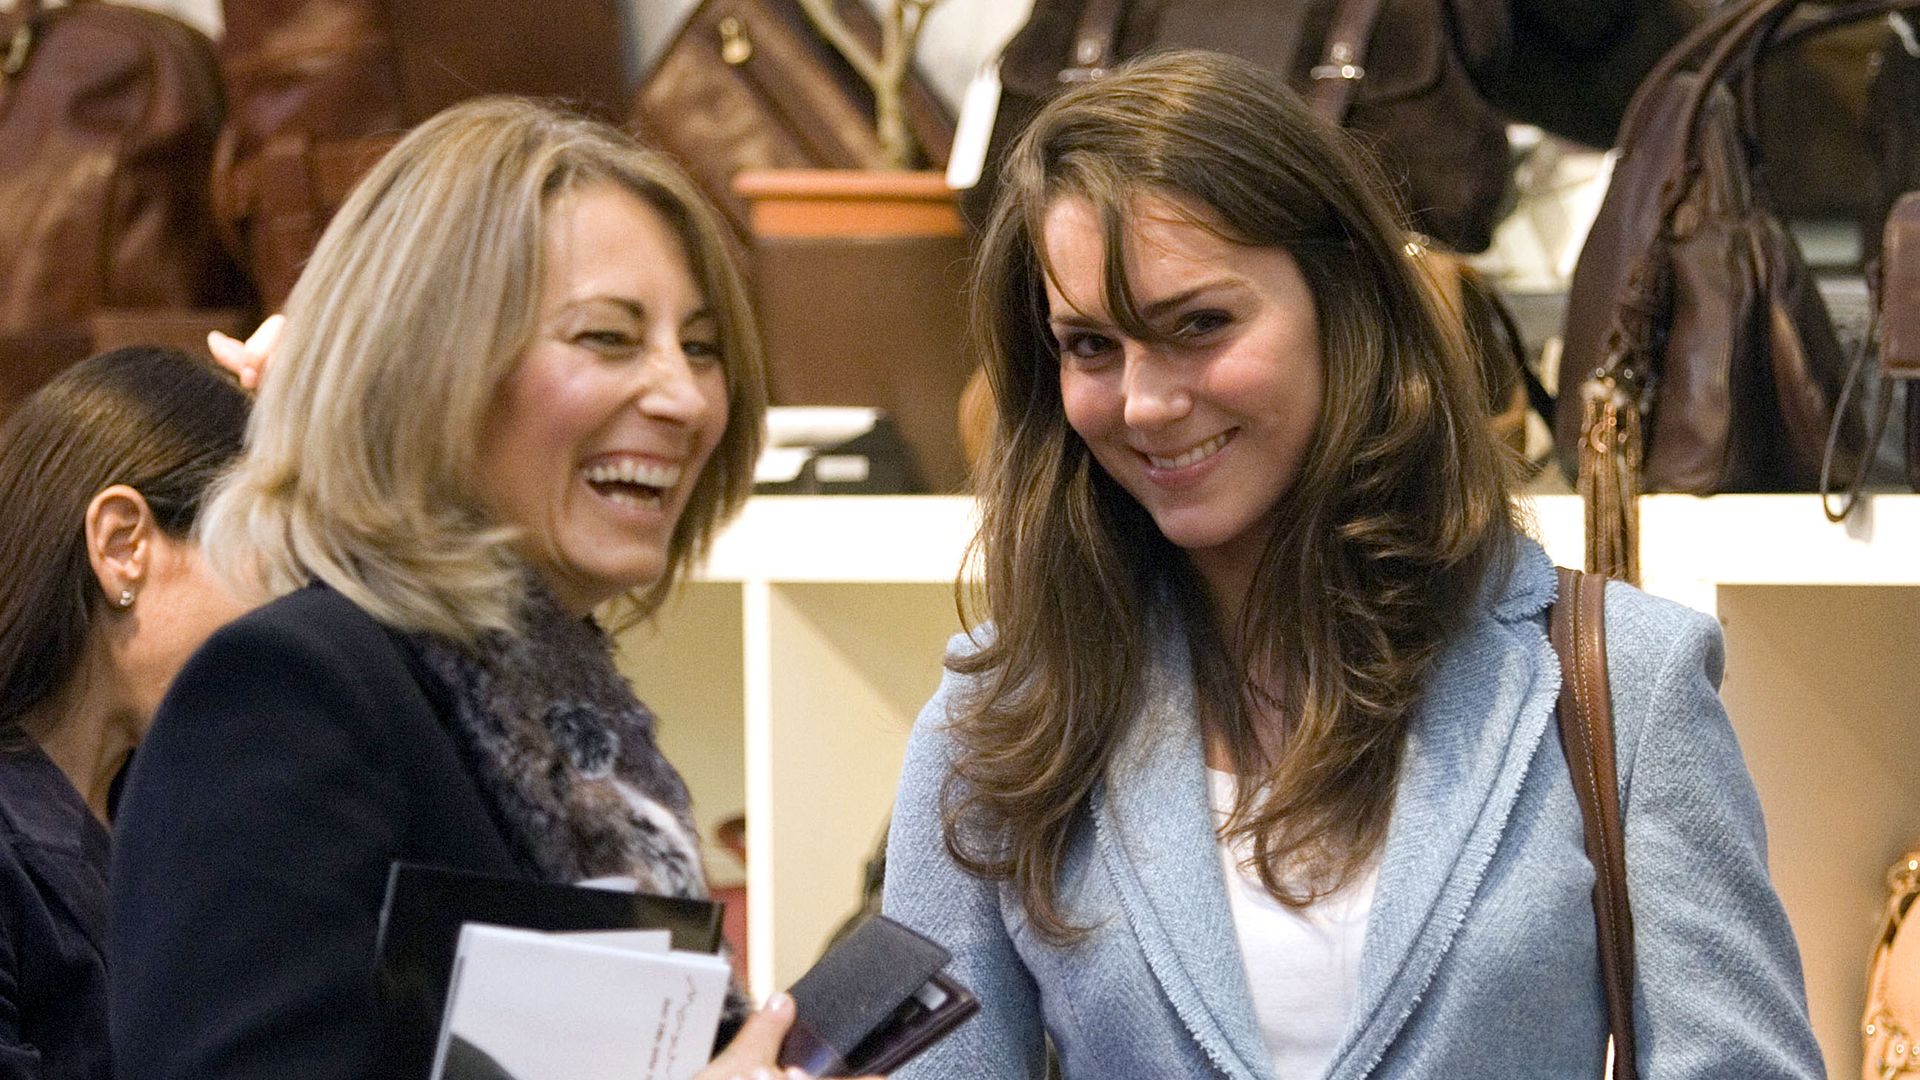 Carole Middleton and Kate Middleton laughing in a shop. 